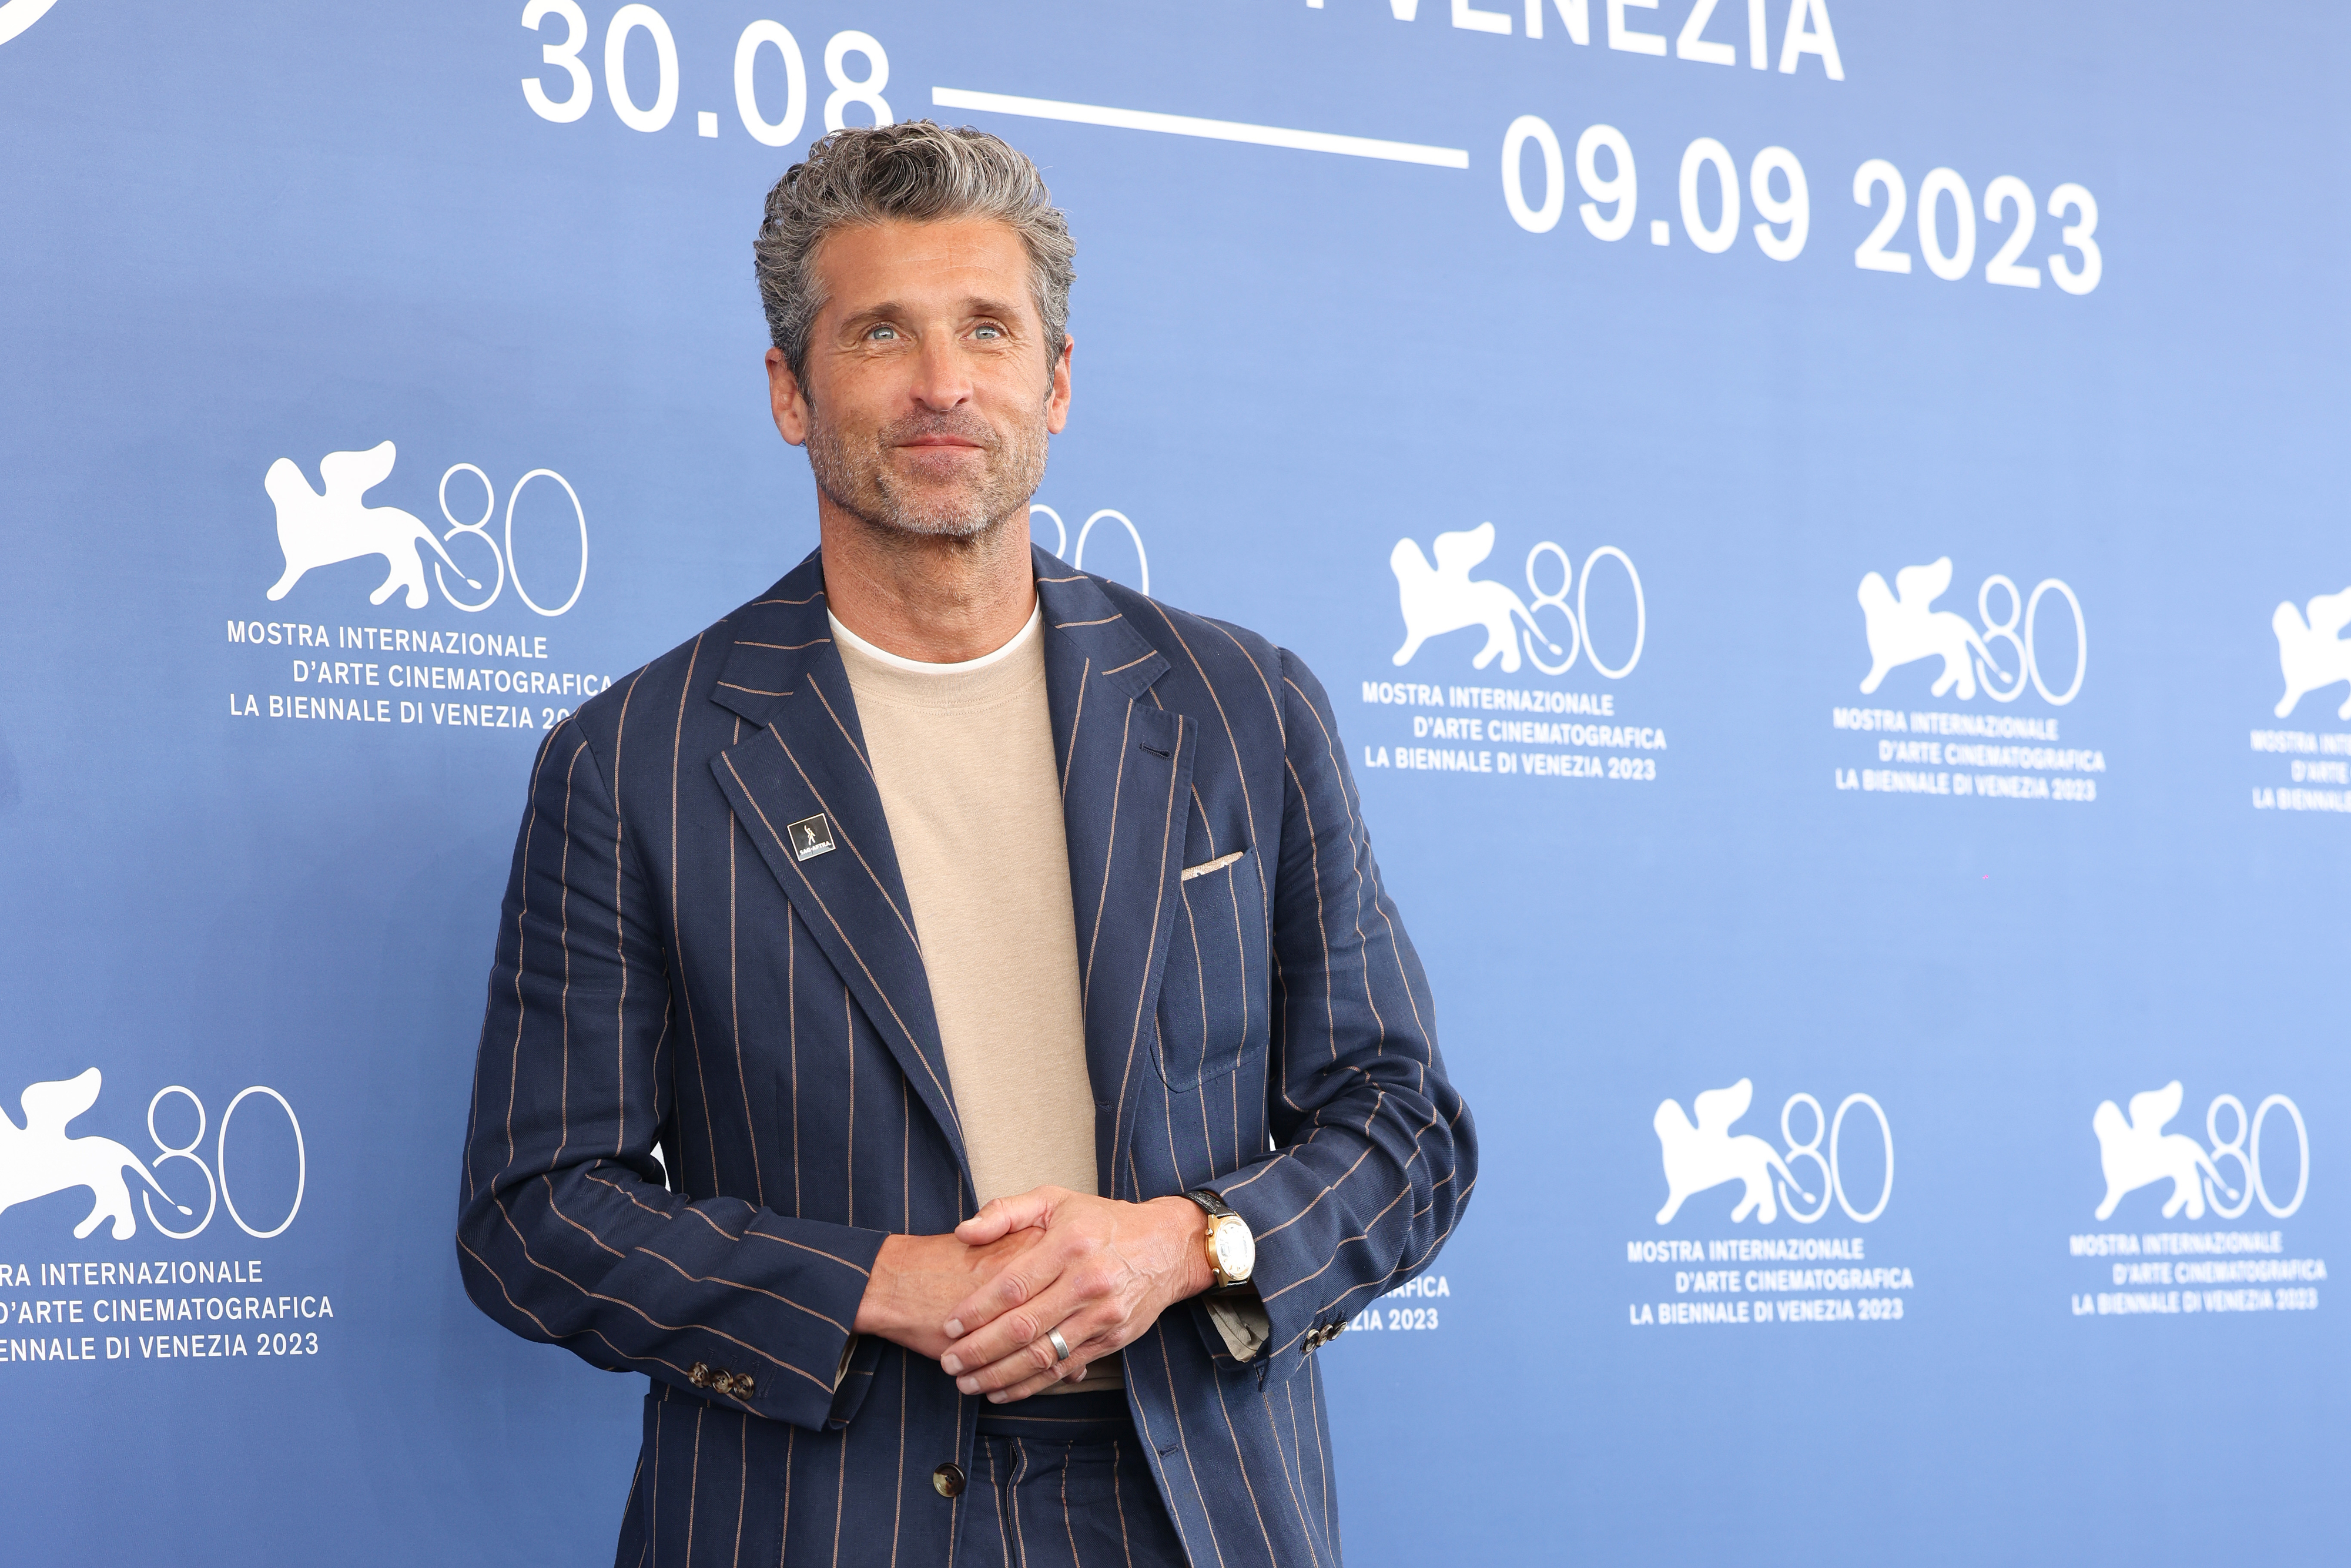 Close-up of Patrick at the festival, wearing a pin-striped suit and T-shirt